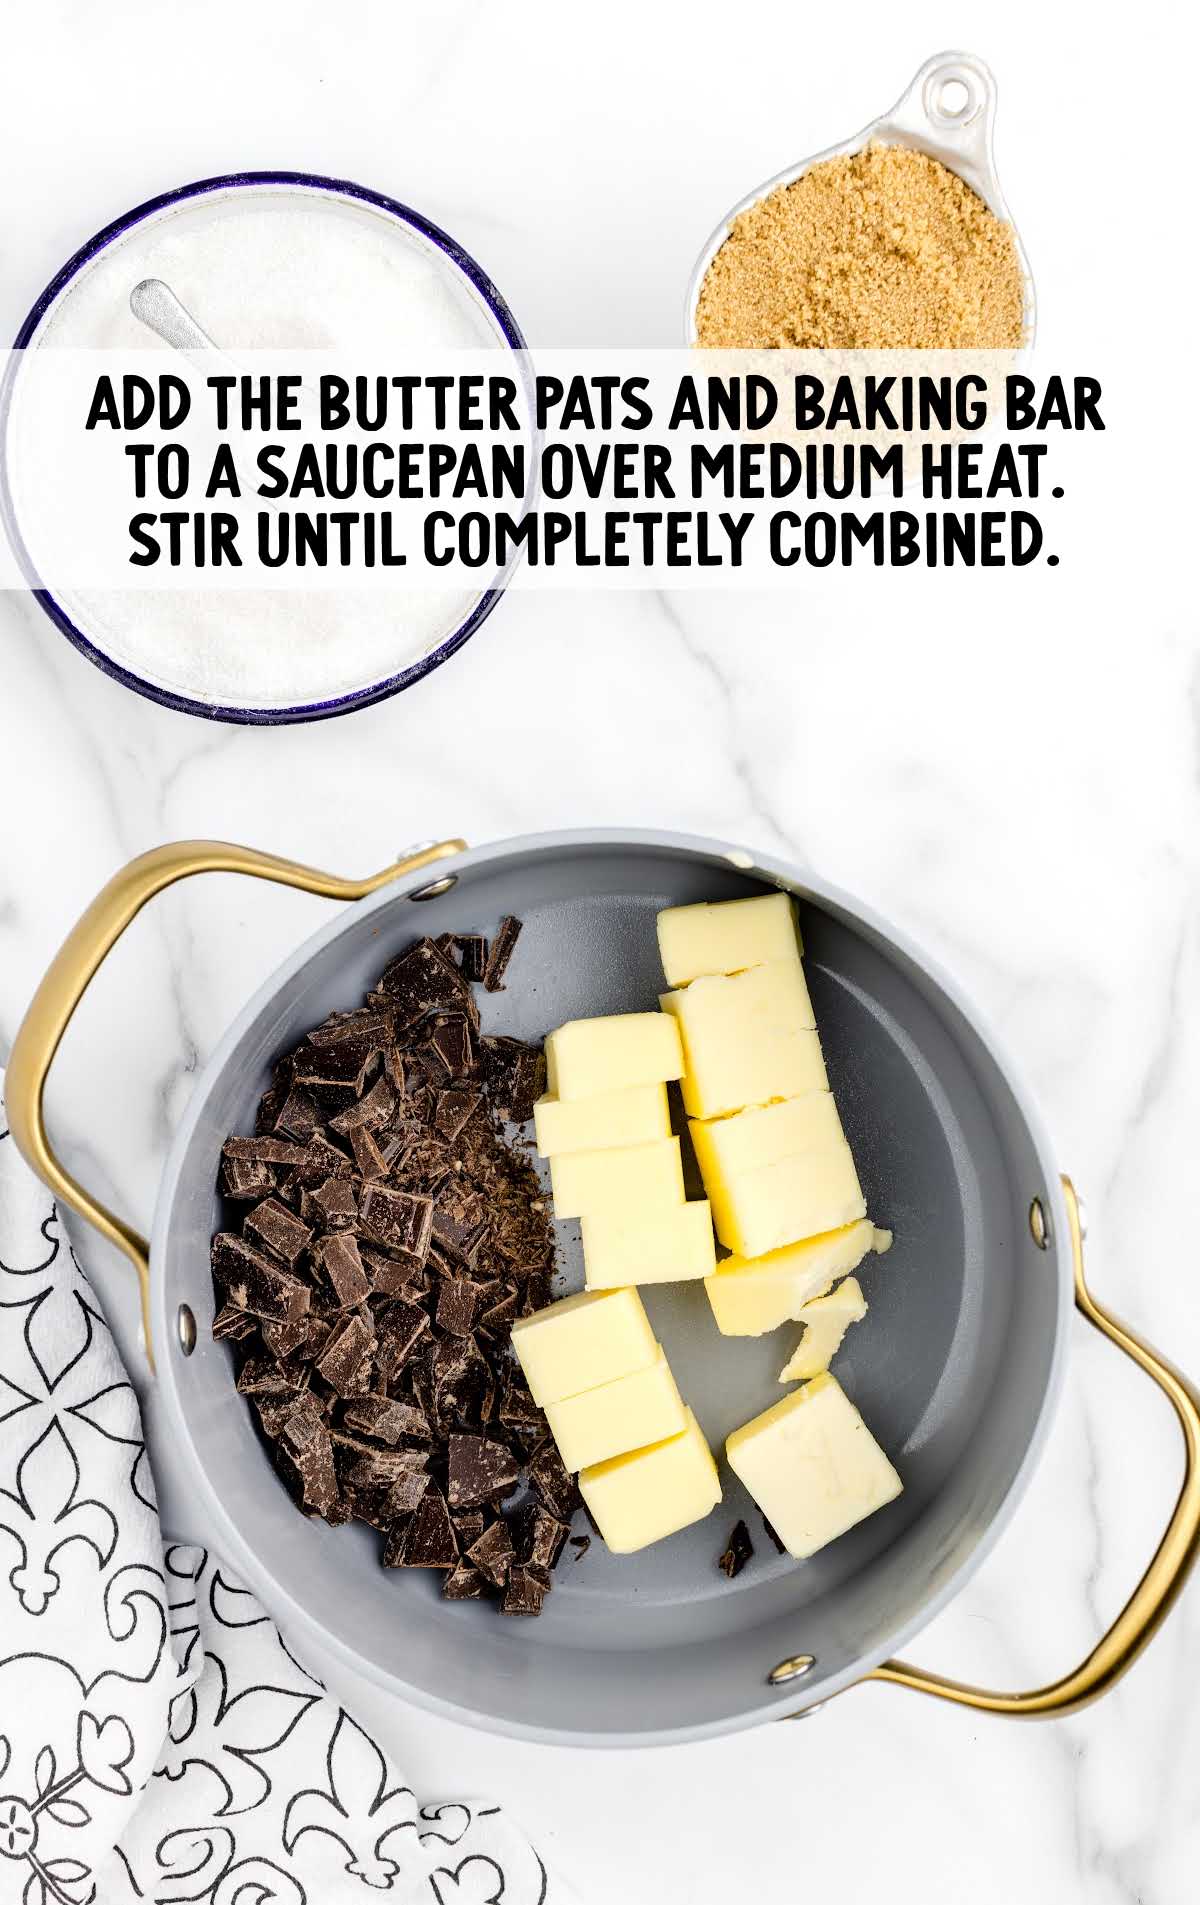 butter and baking bar added to a saucepan